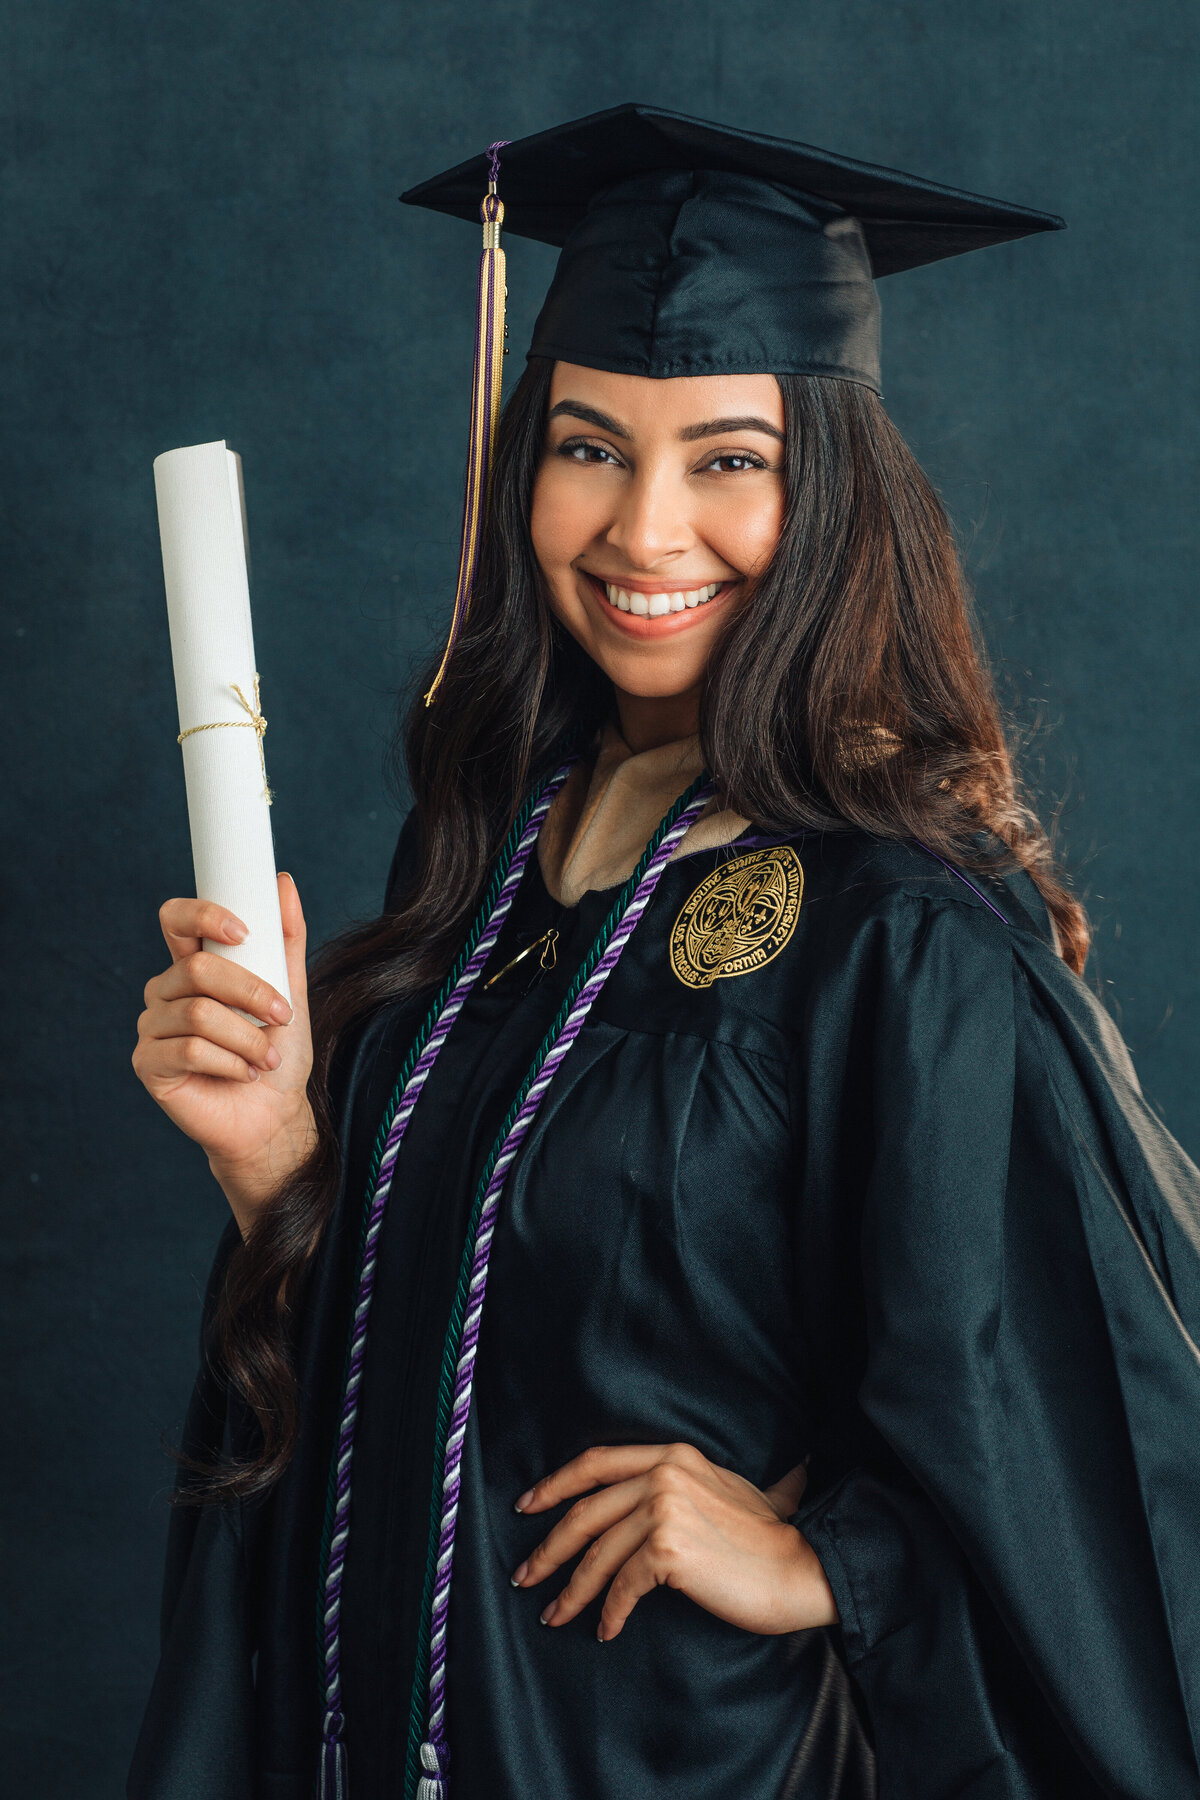 Graduation Portrait Of Young Woman In Black Toga Showing Her Diploma Los Angeles